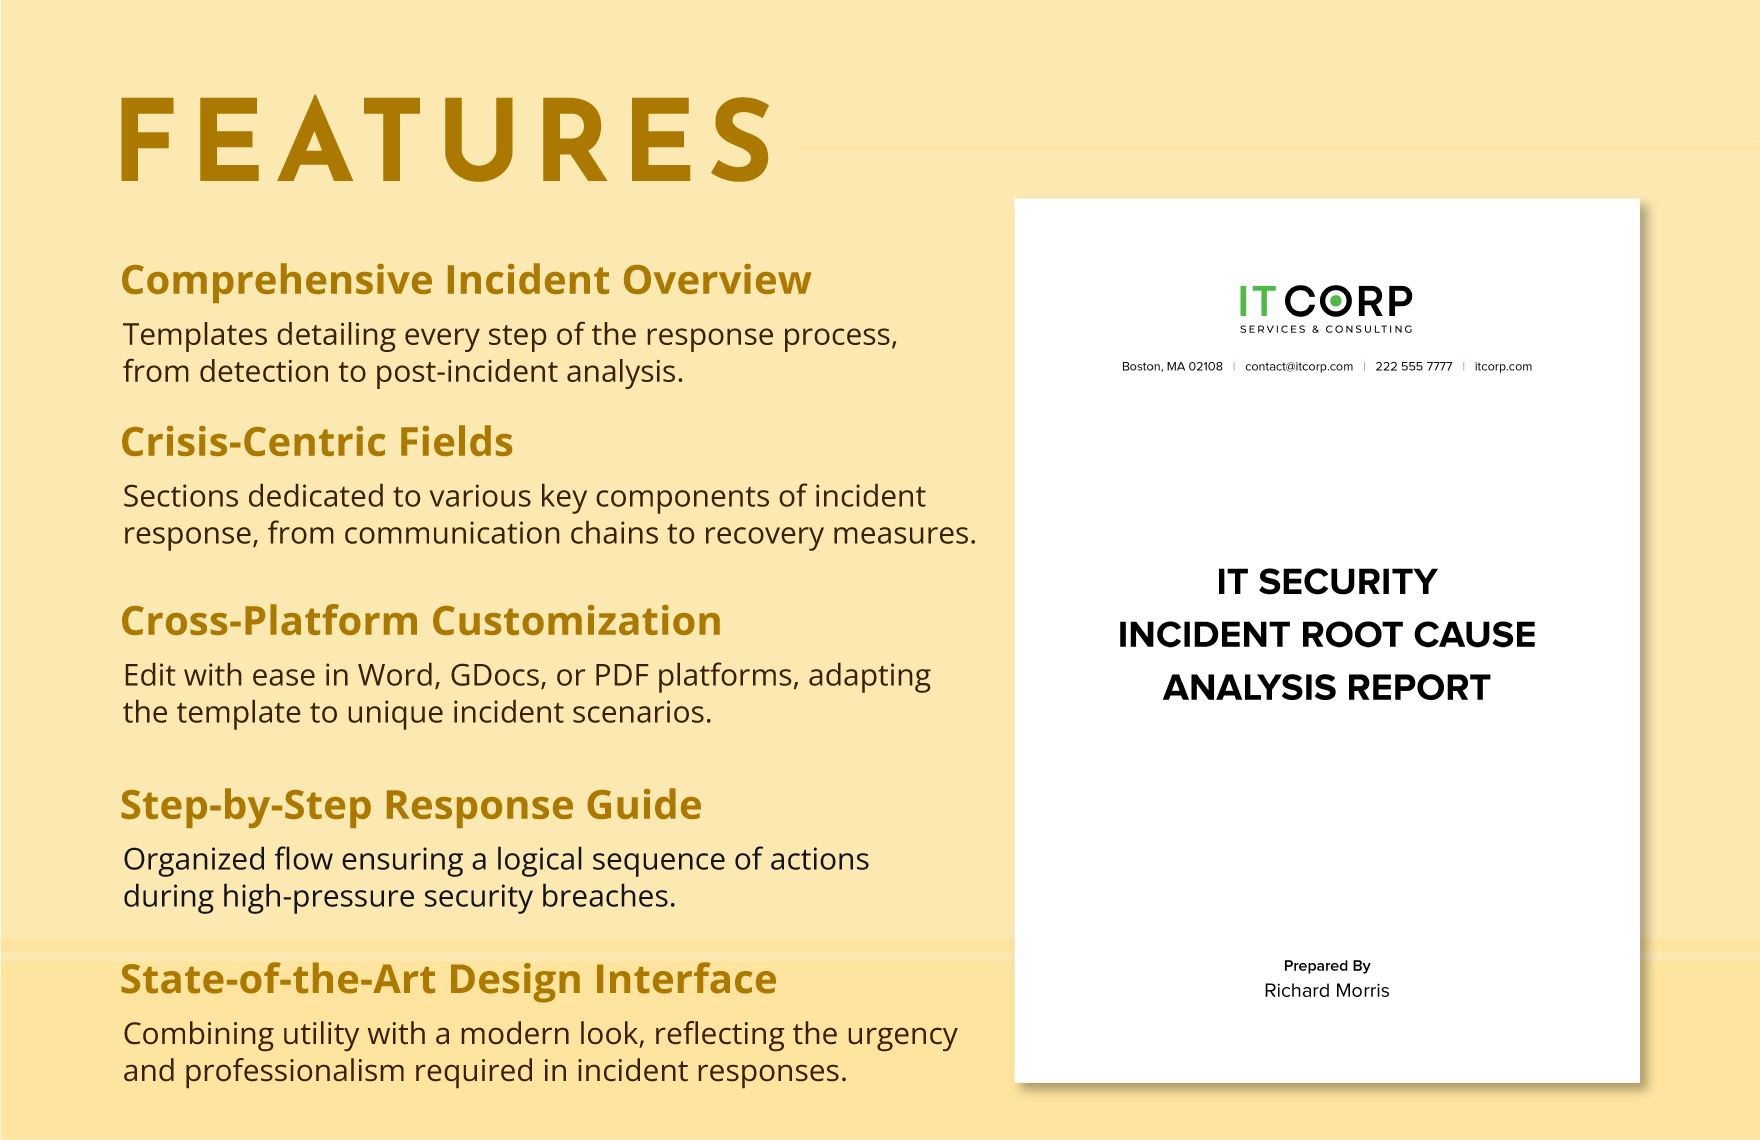 IT Security Incident Root Cause Analysis Report Template